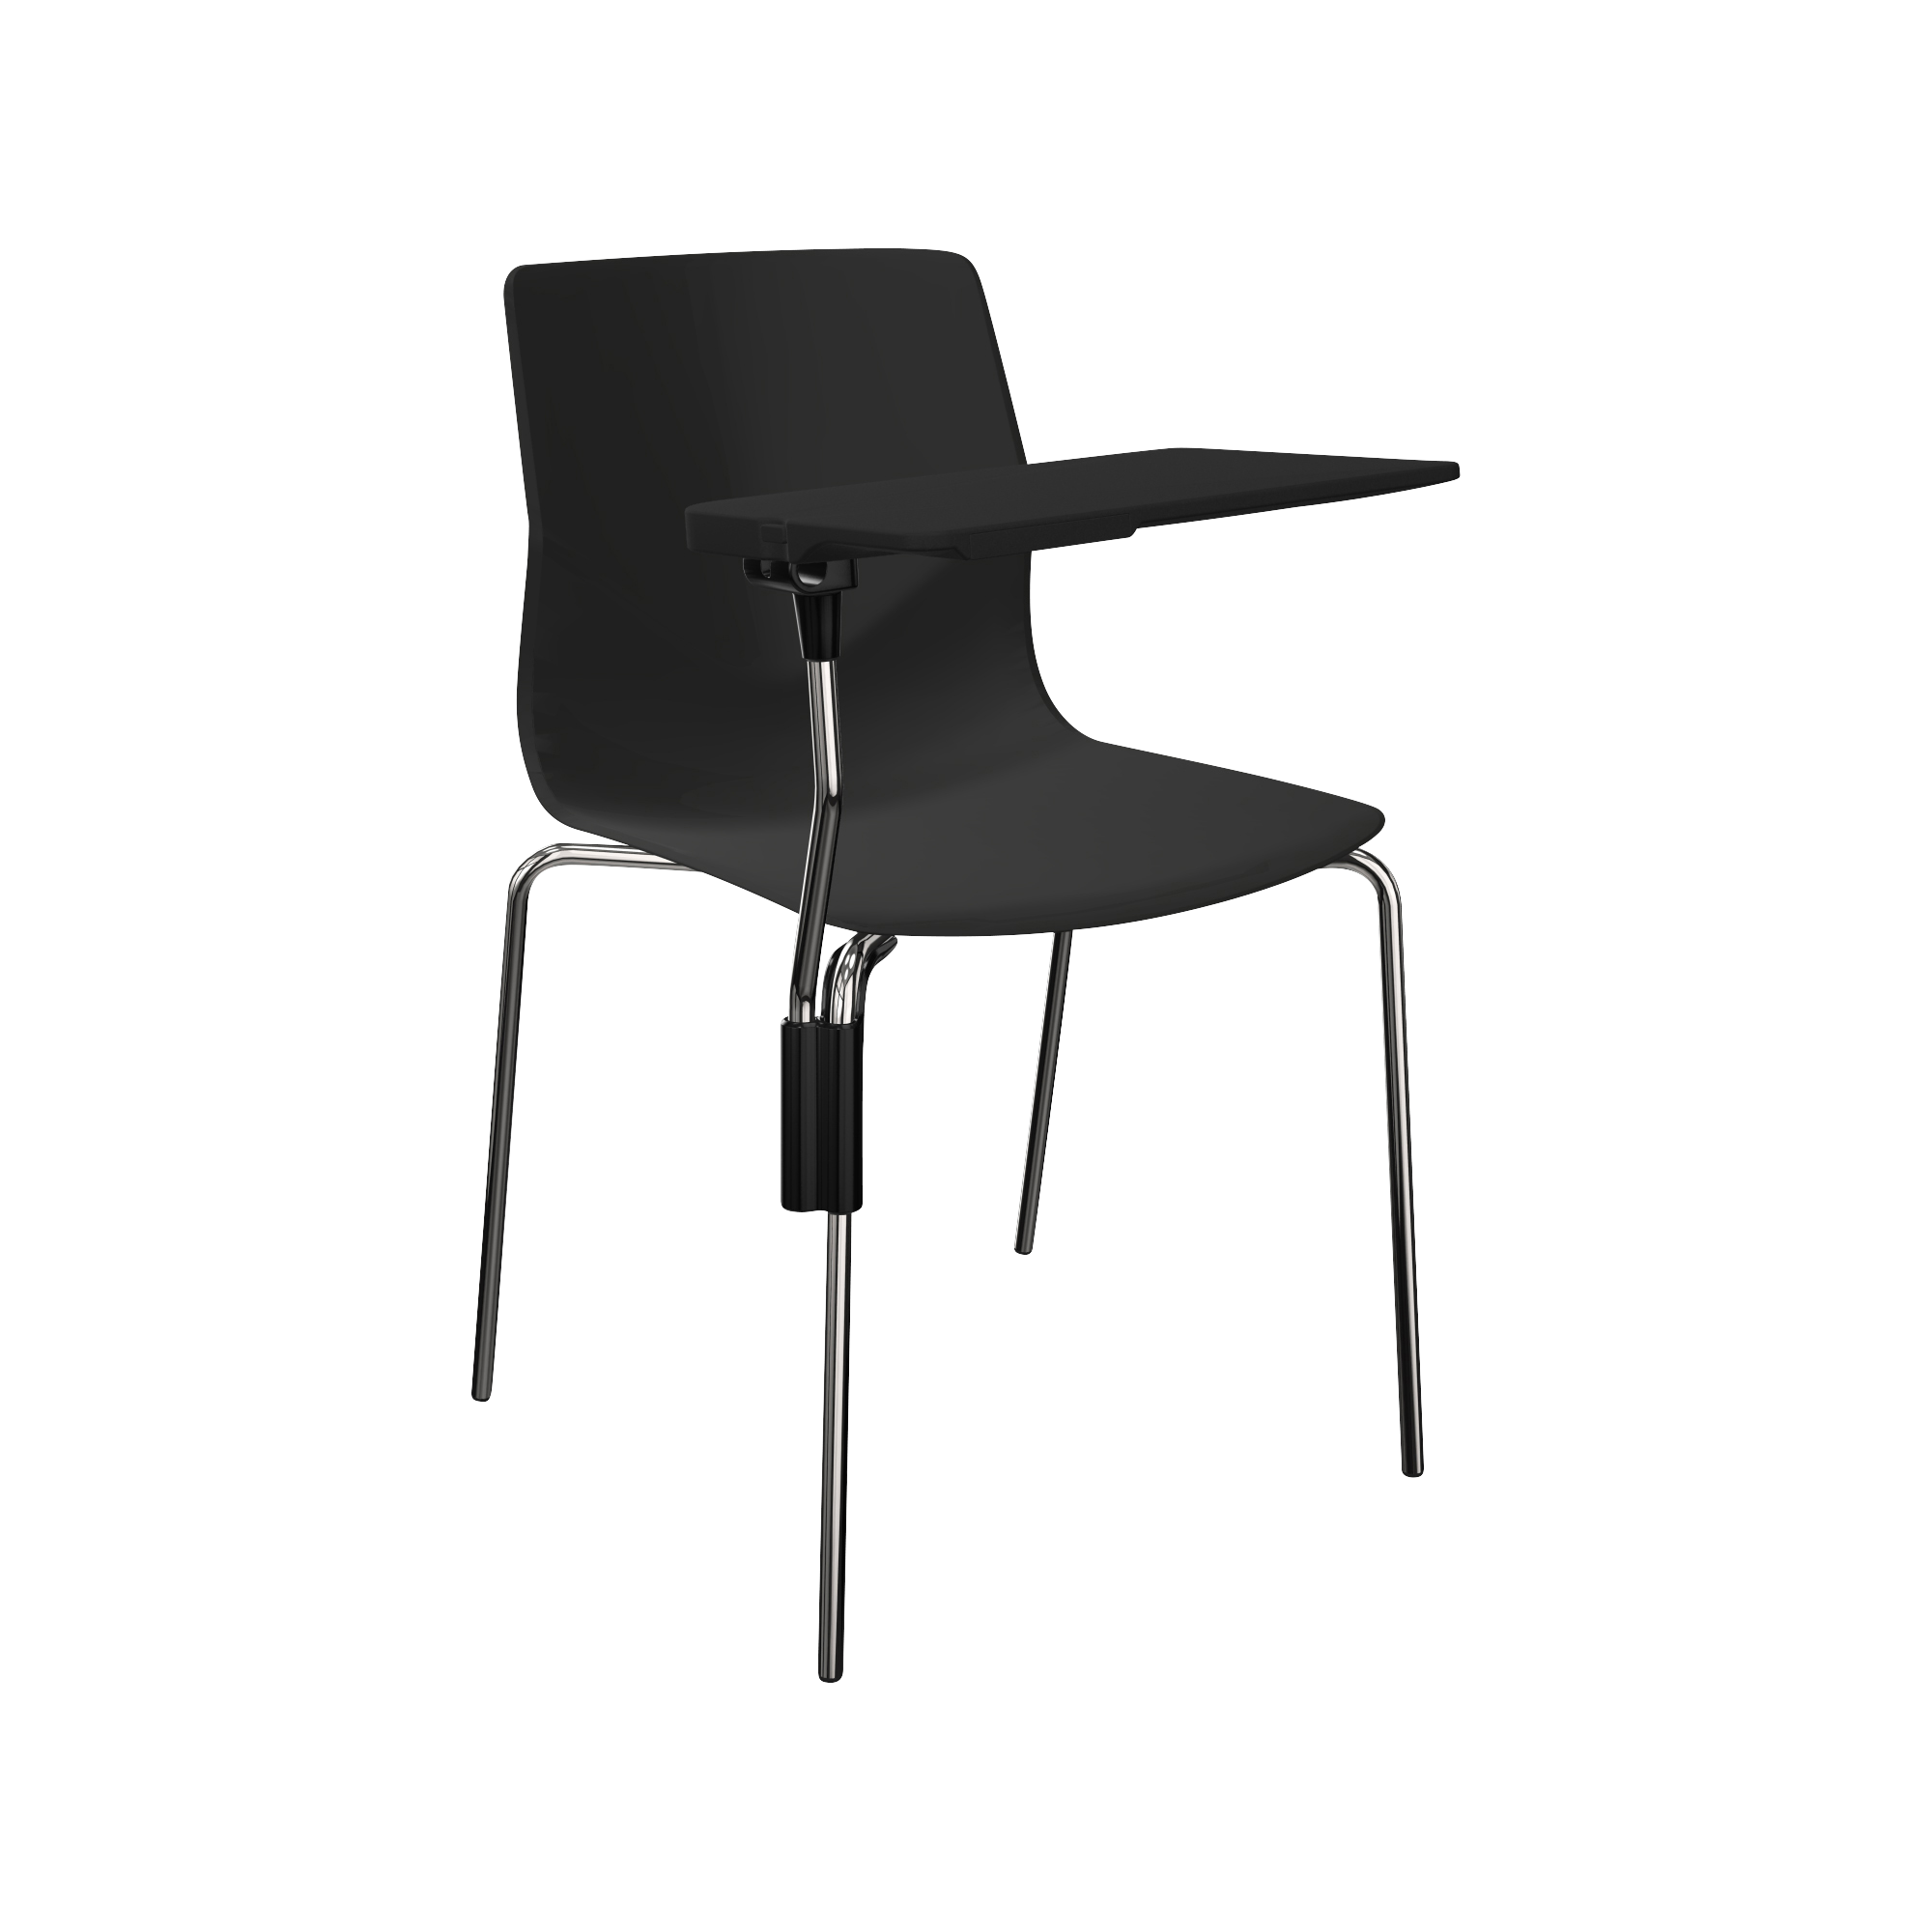 A grey designer desk chair with a desk attached